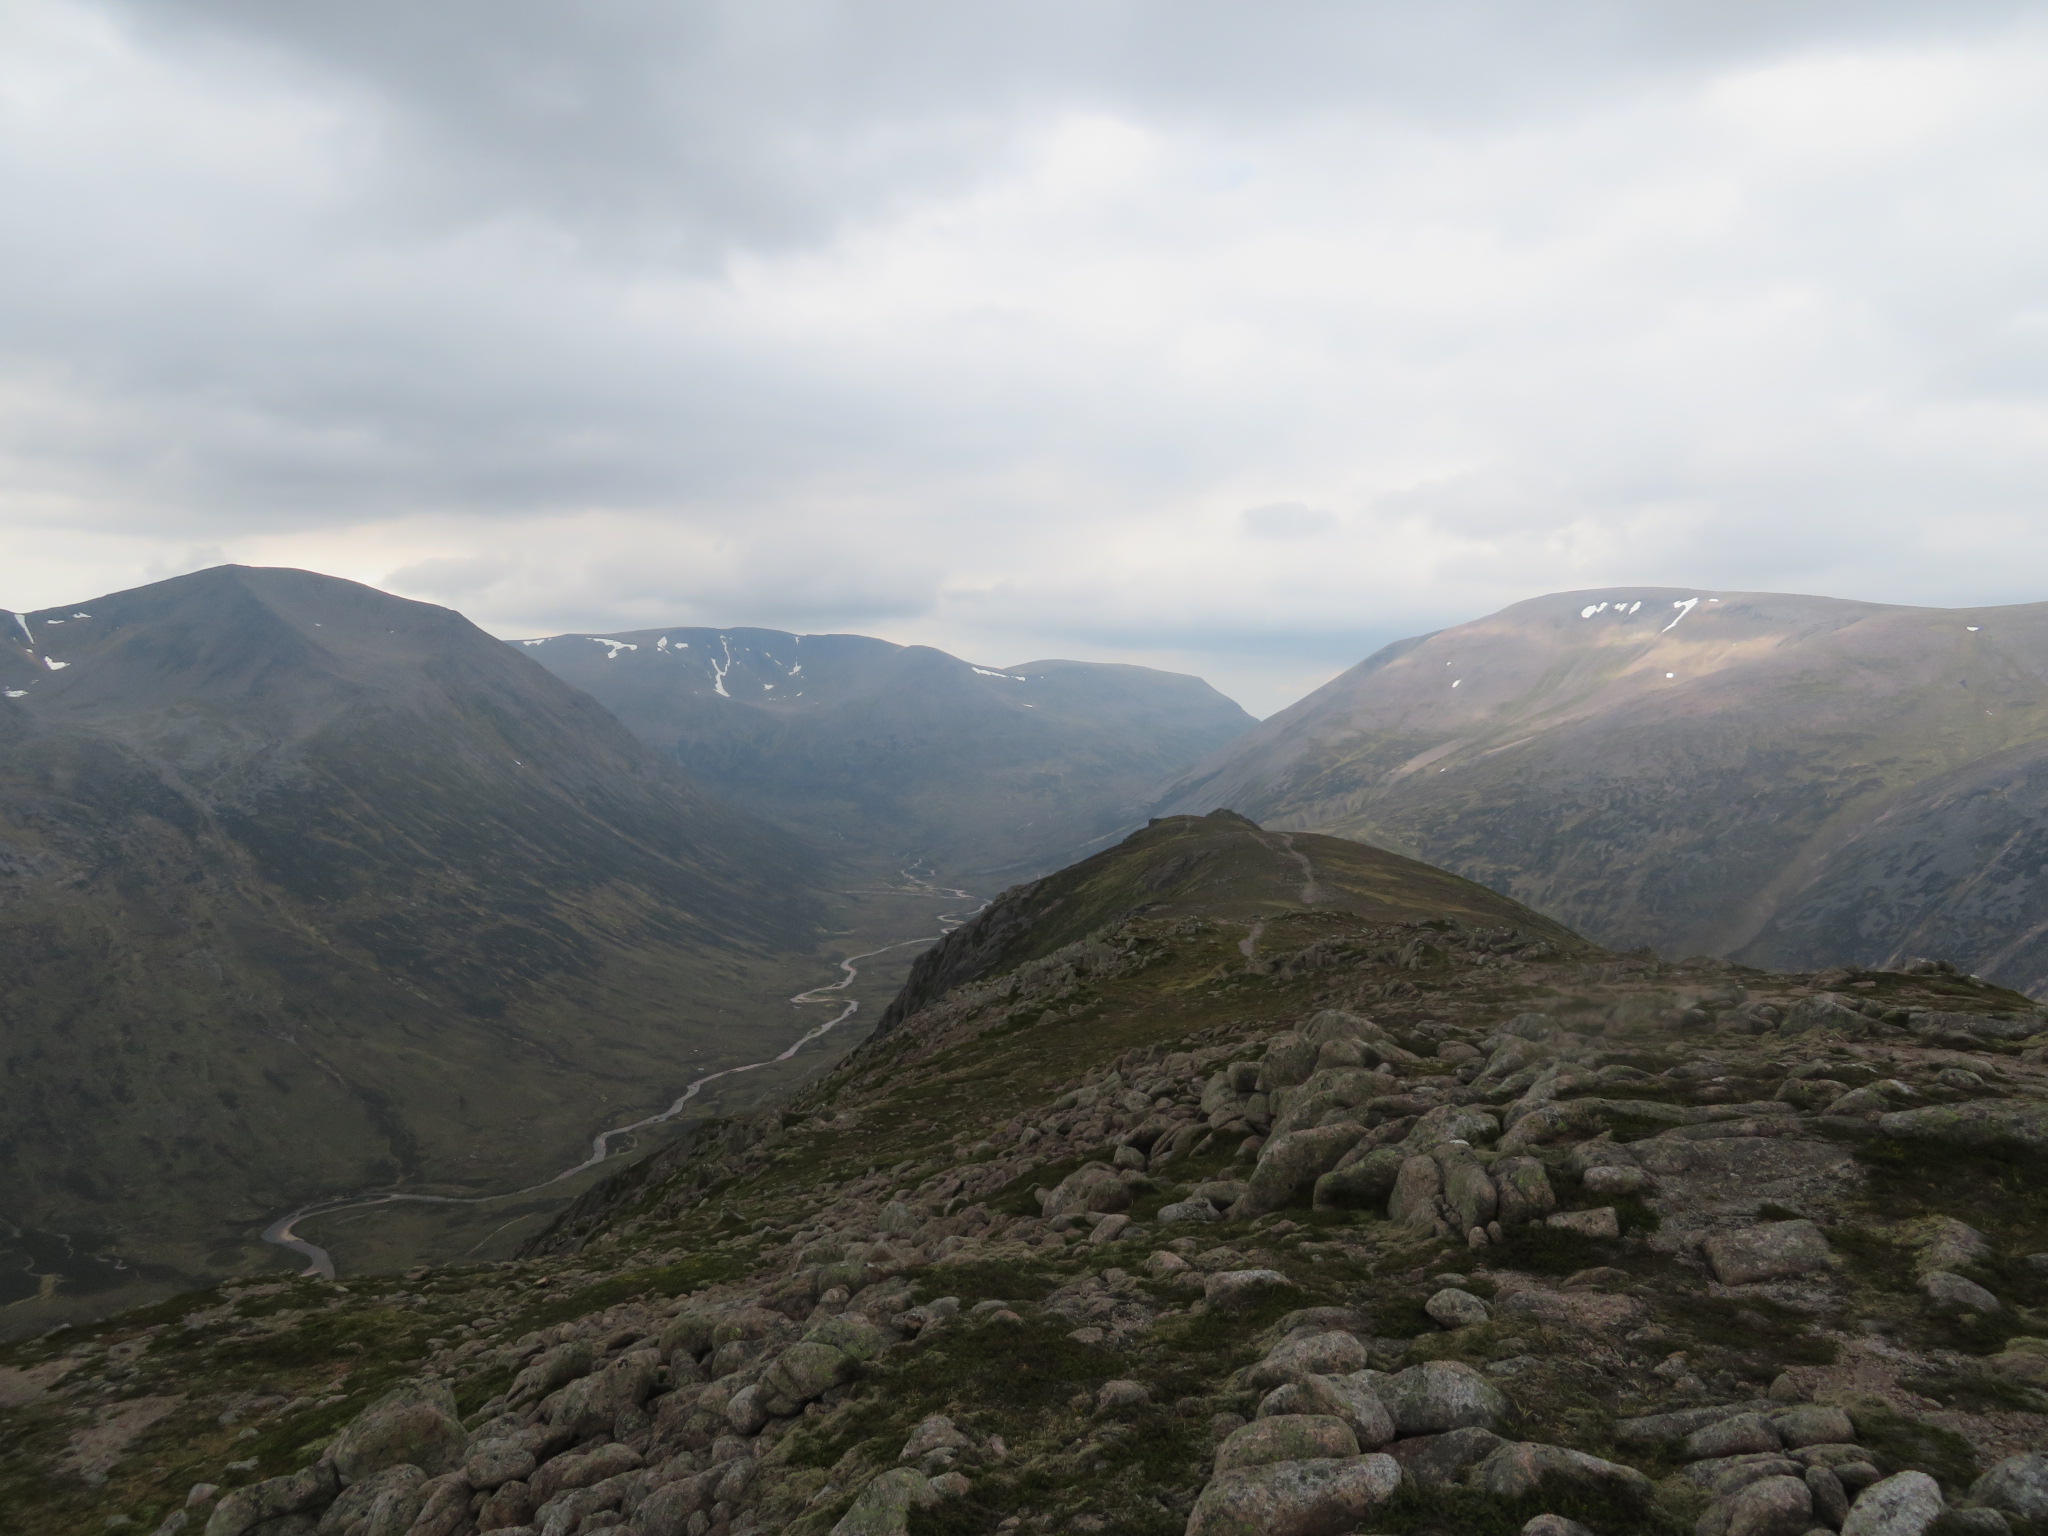 The Cairngorms: Cairn Toul, Braeriach, Bern Macdui and  upper Dee towards Lairig Ghru,  from Carn A Mhaim - © William Mackesy